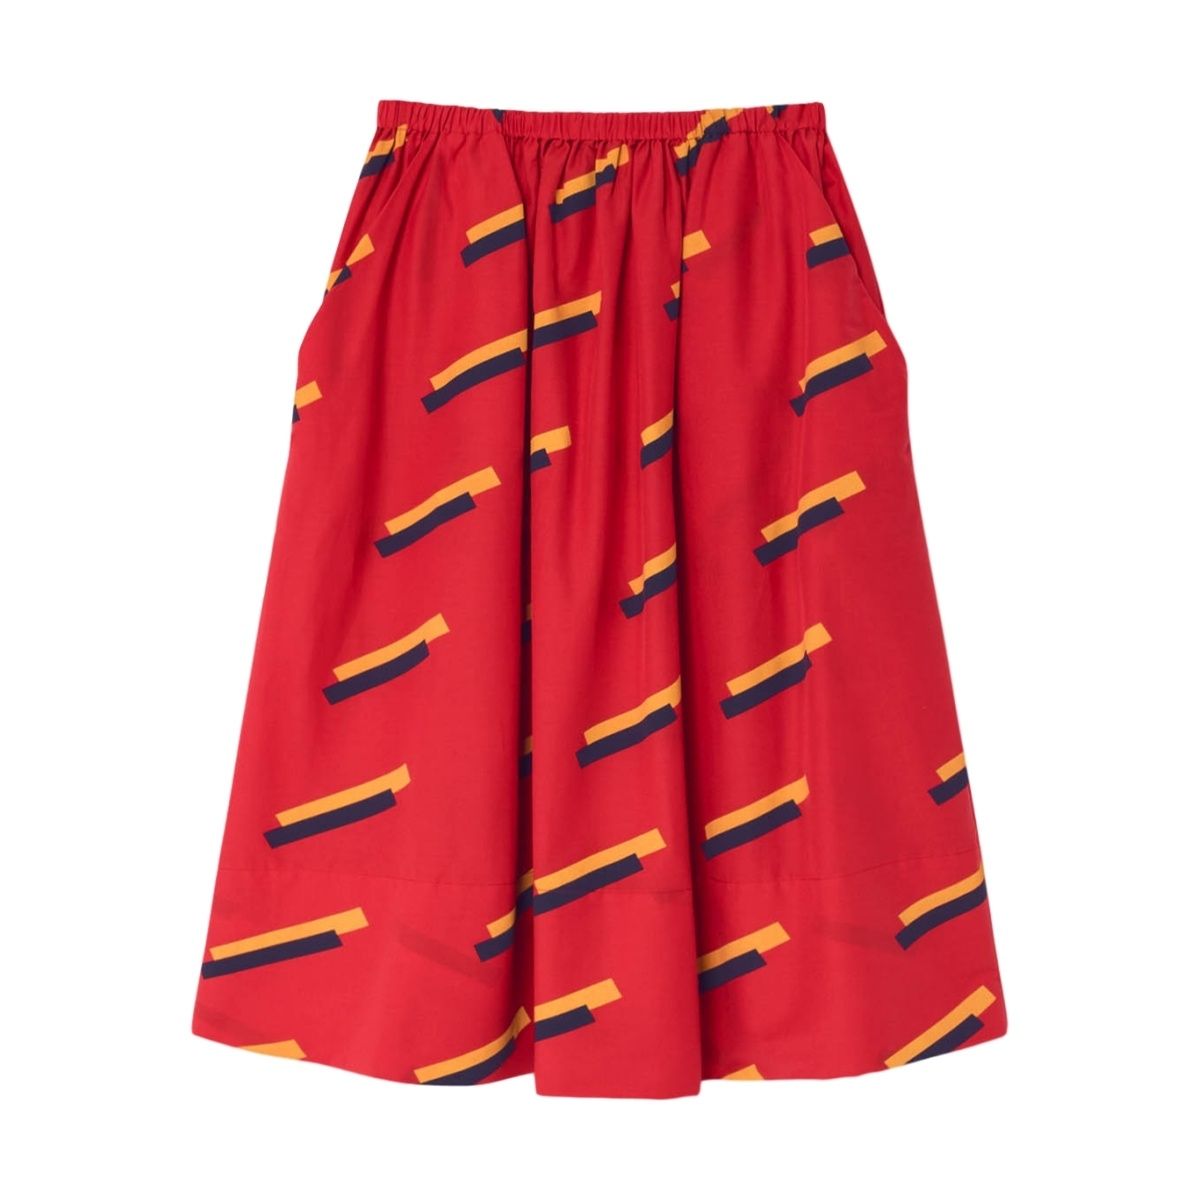 The Animals Observatory - 80's skirt red - Skirts & shorts - 001040_038_MQ 